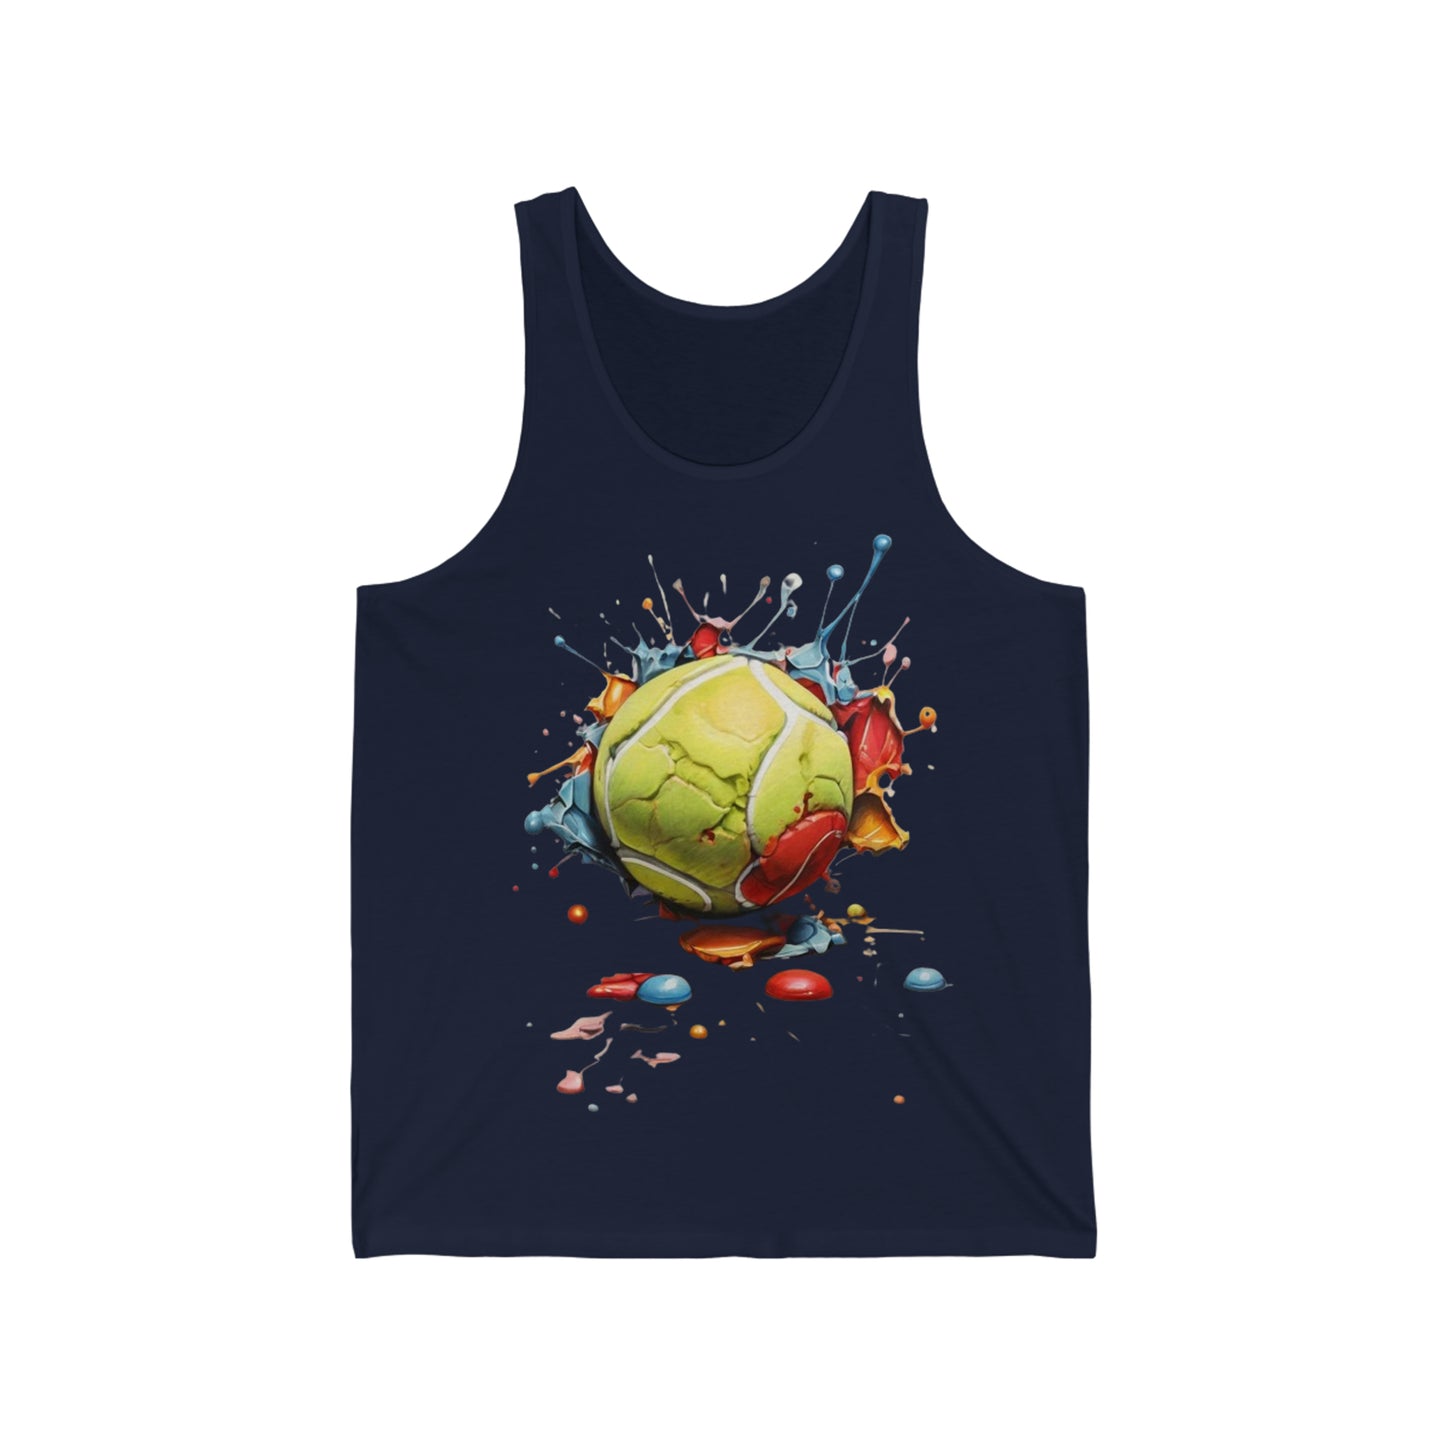 Messy Colourful Tennis Ball - Unisex Jersey Tank